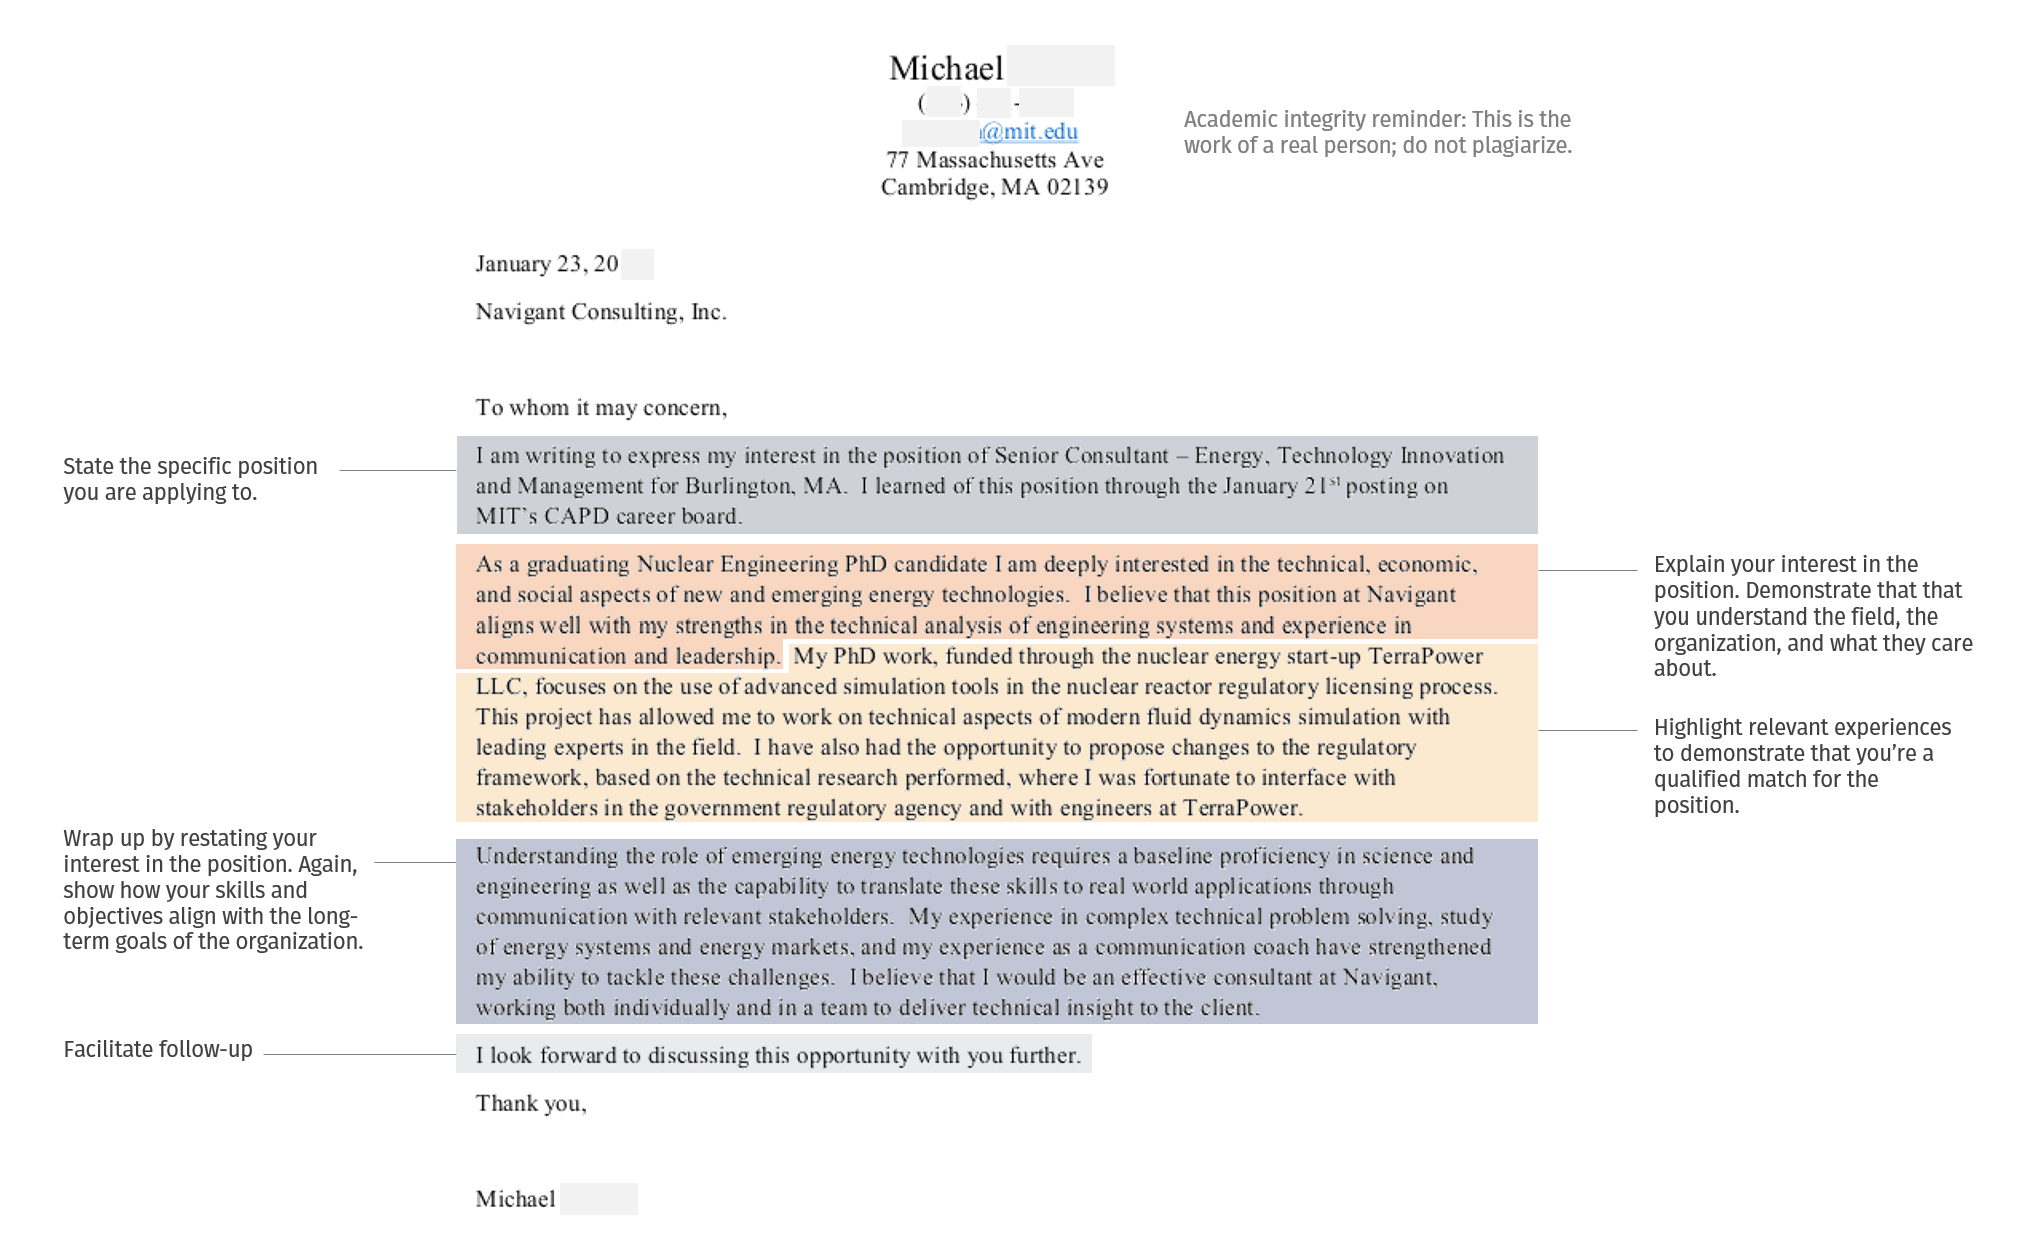 Cover Letter For A Position from mitcommlab.mit.edu